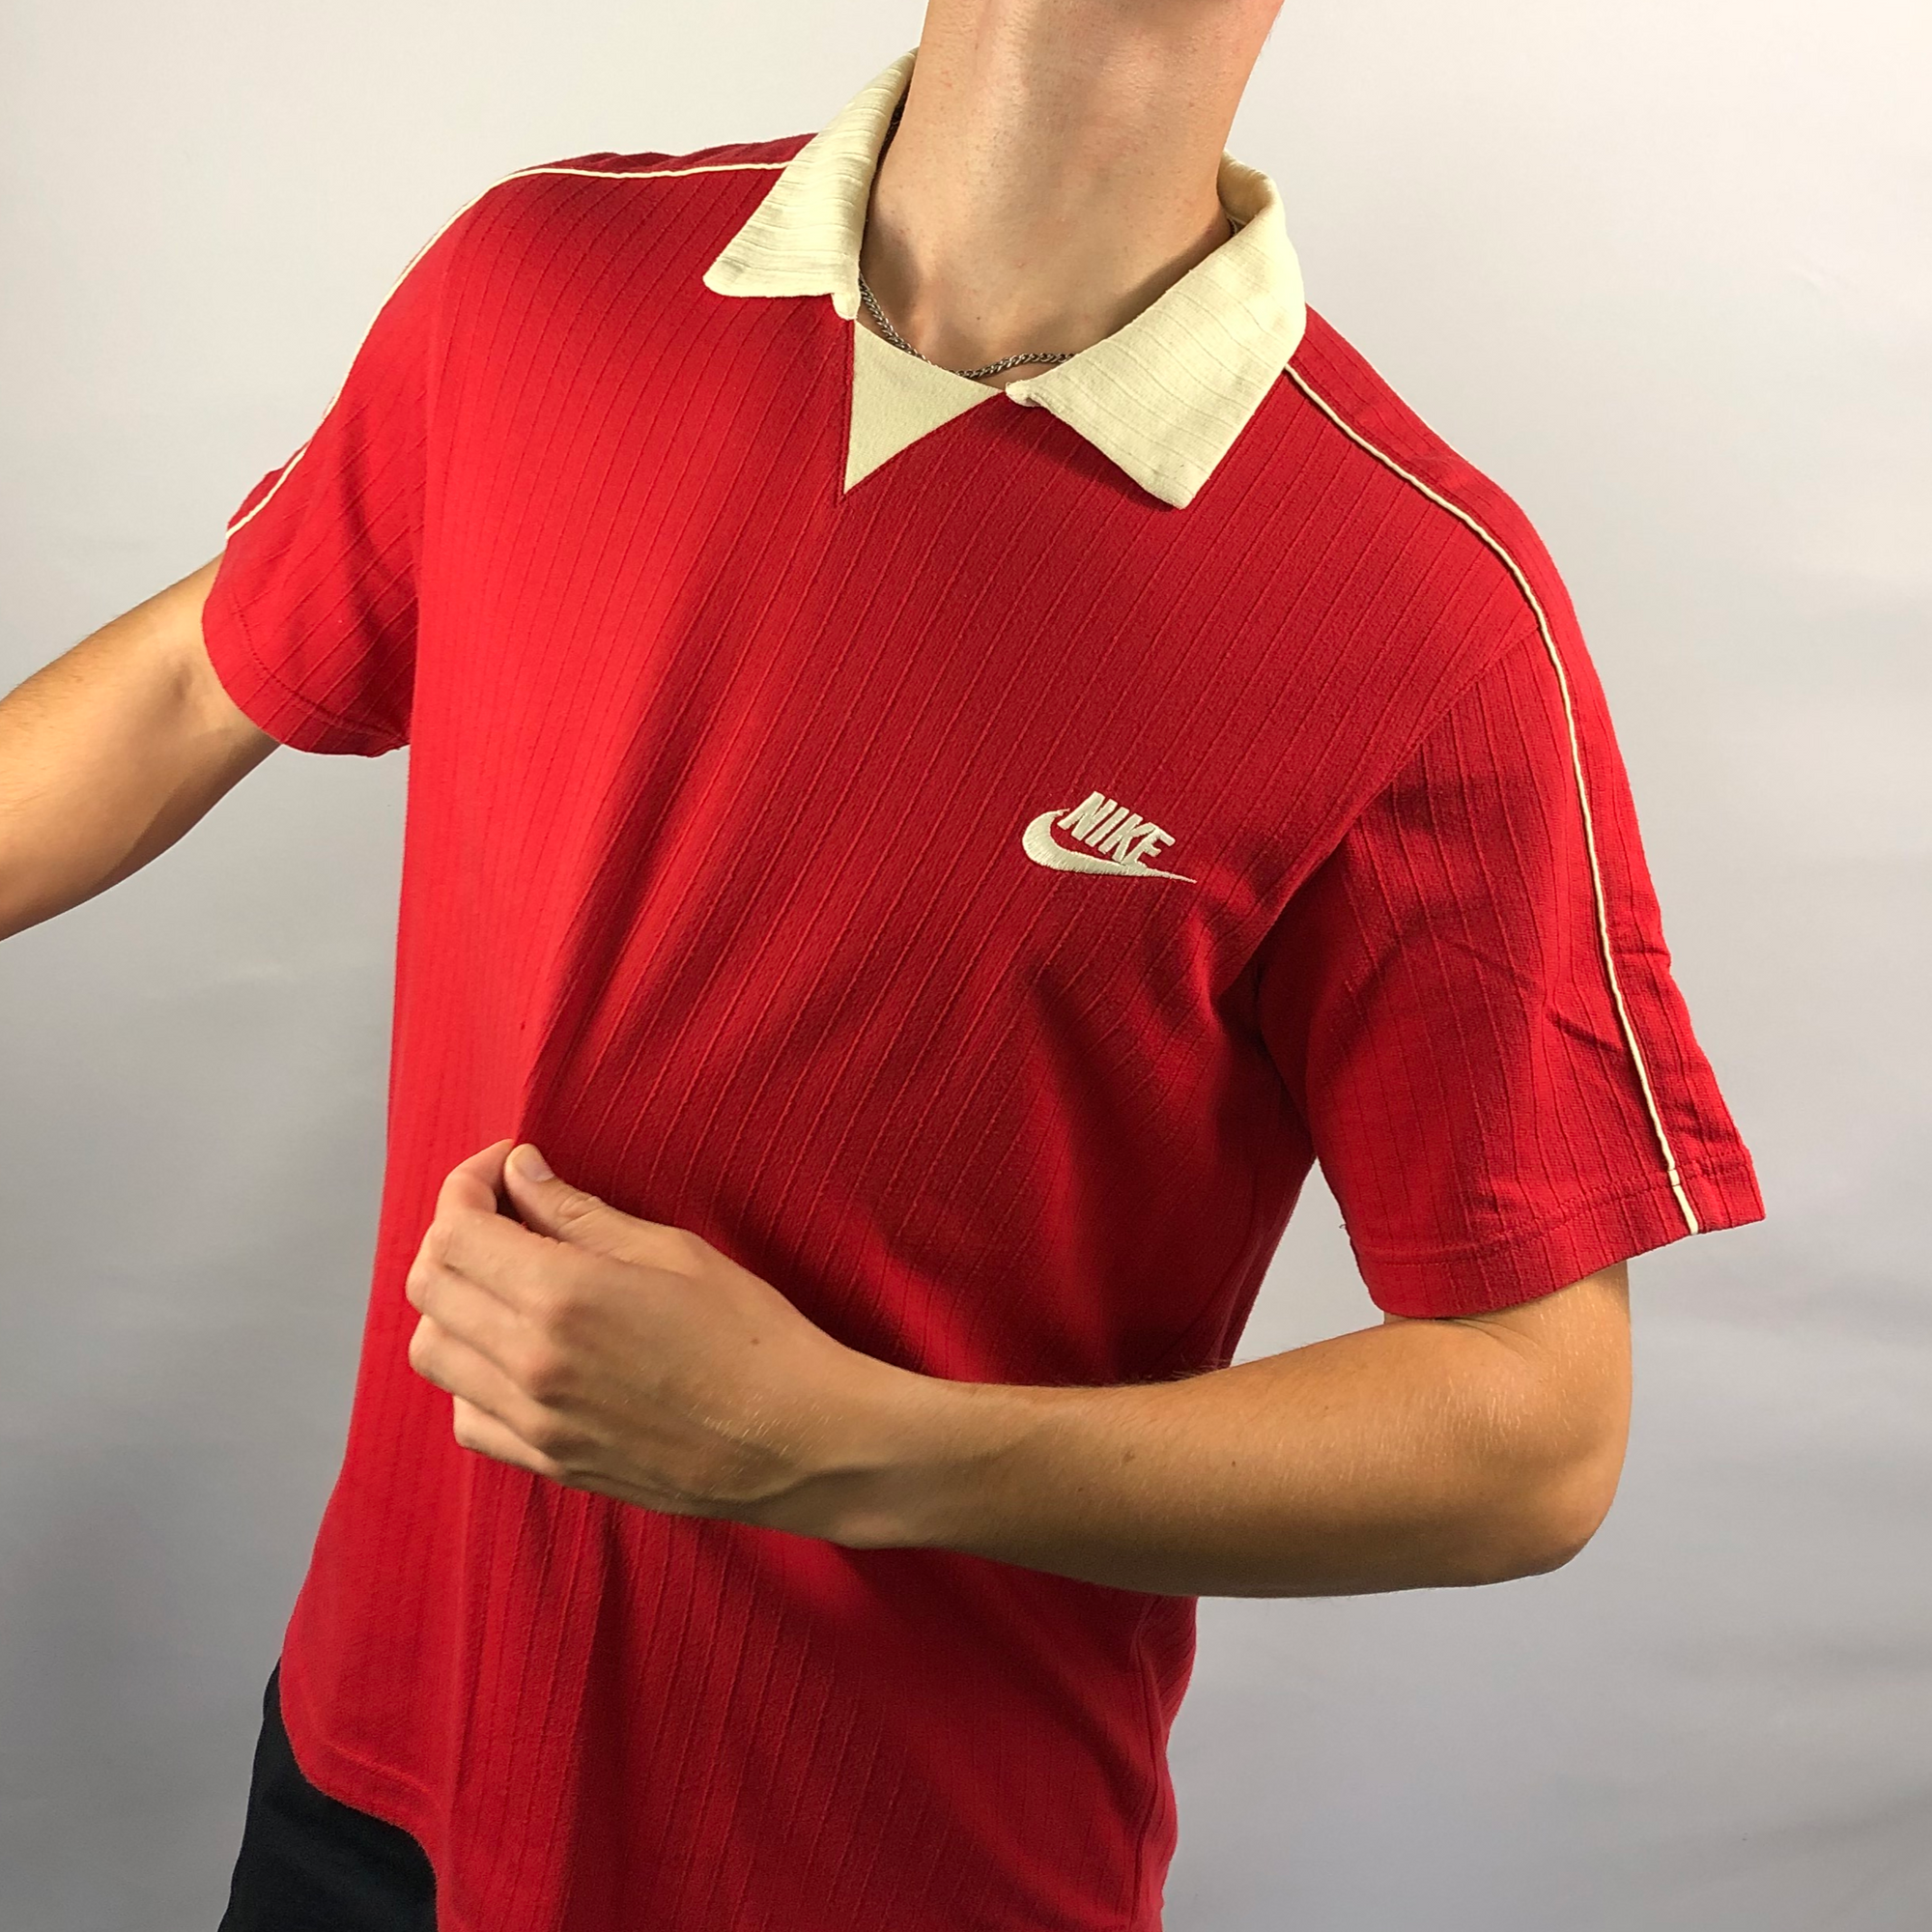 Vintage Nike Polo Shirt in Red & Cream - Men's Large/ Women's XL